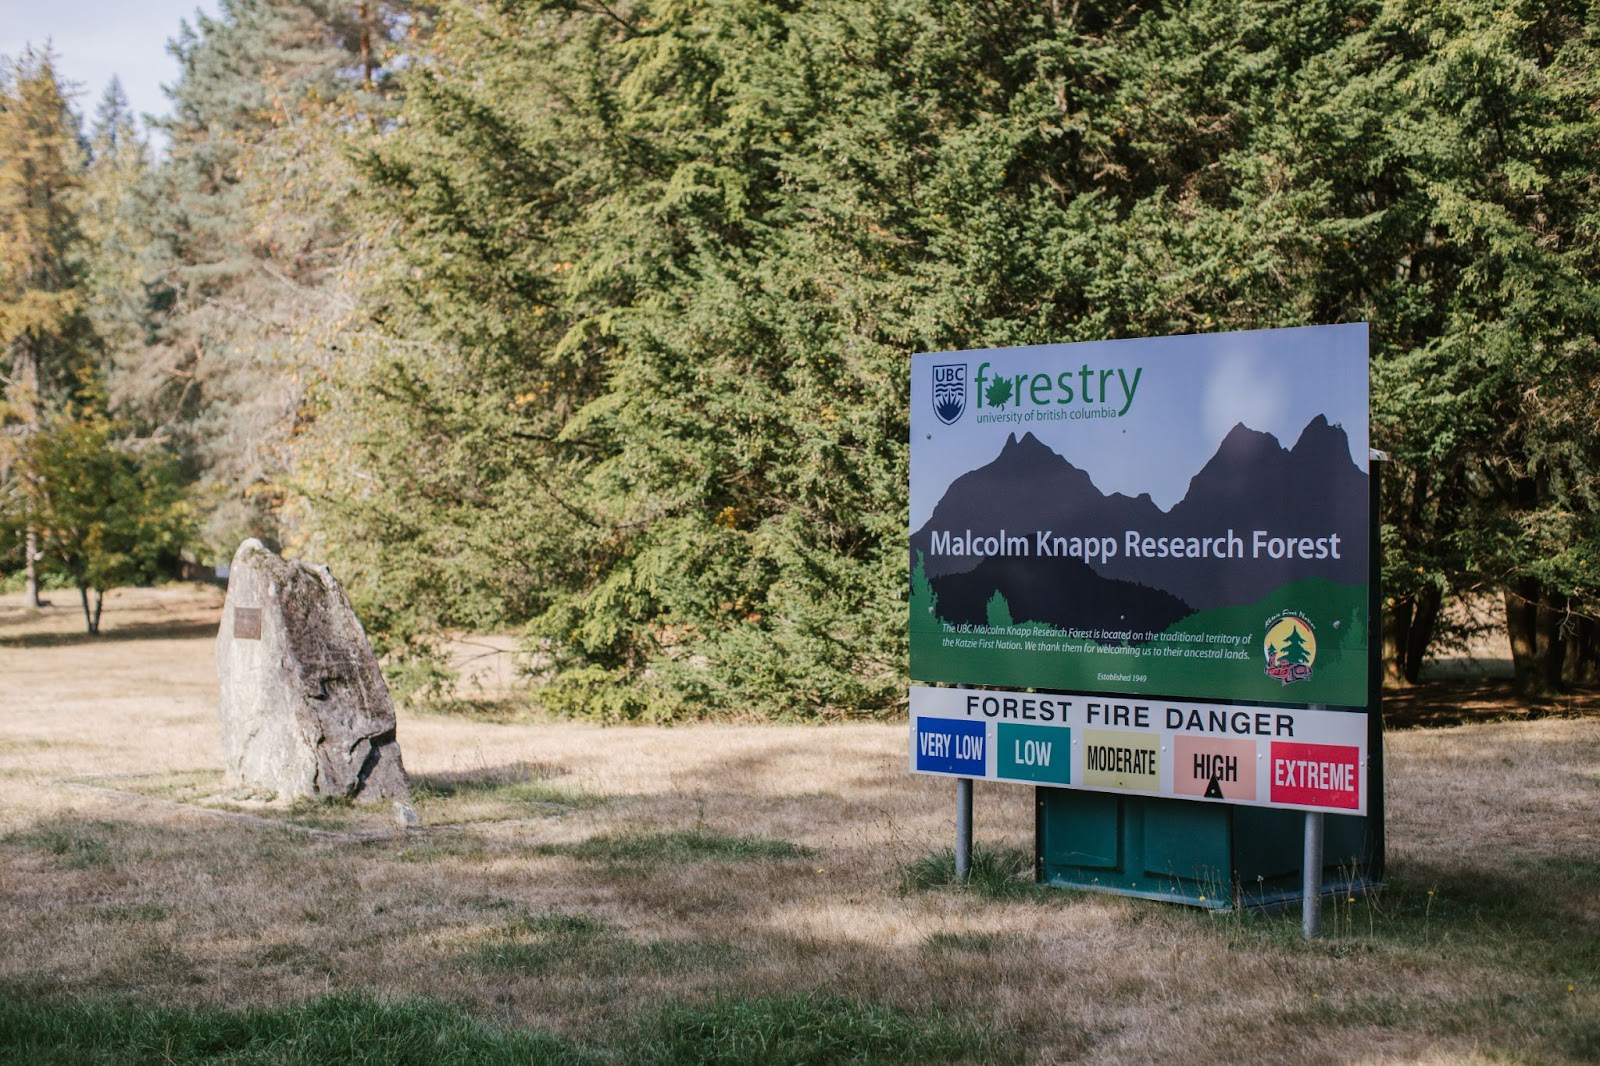 the UBC sign board for the Malcolm Knapp Research Forest with a Forest Fire Danger meter showing high risk for forest fires